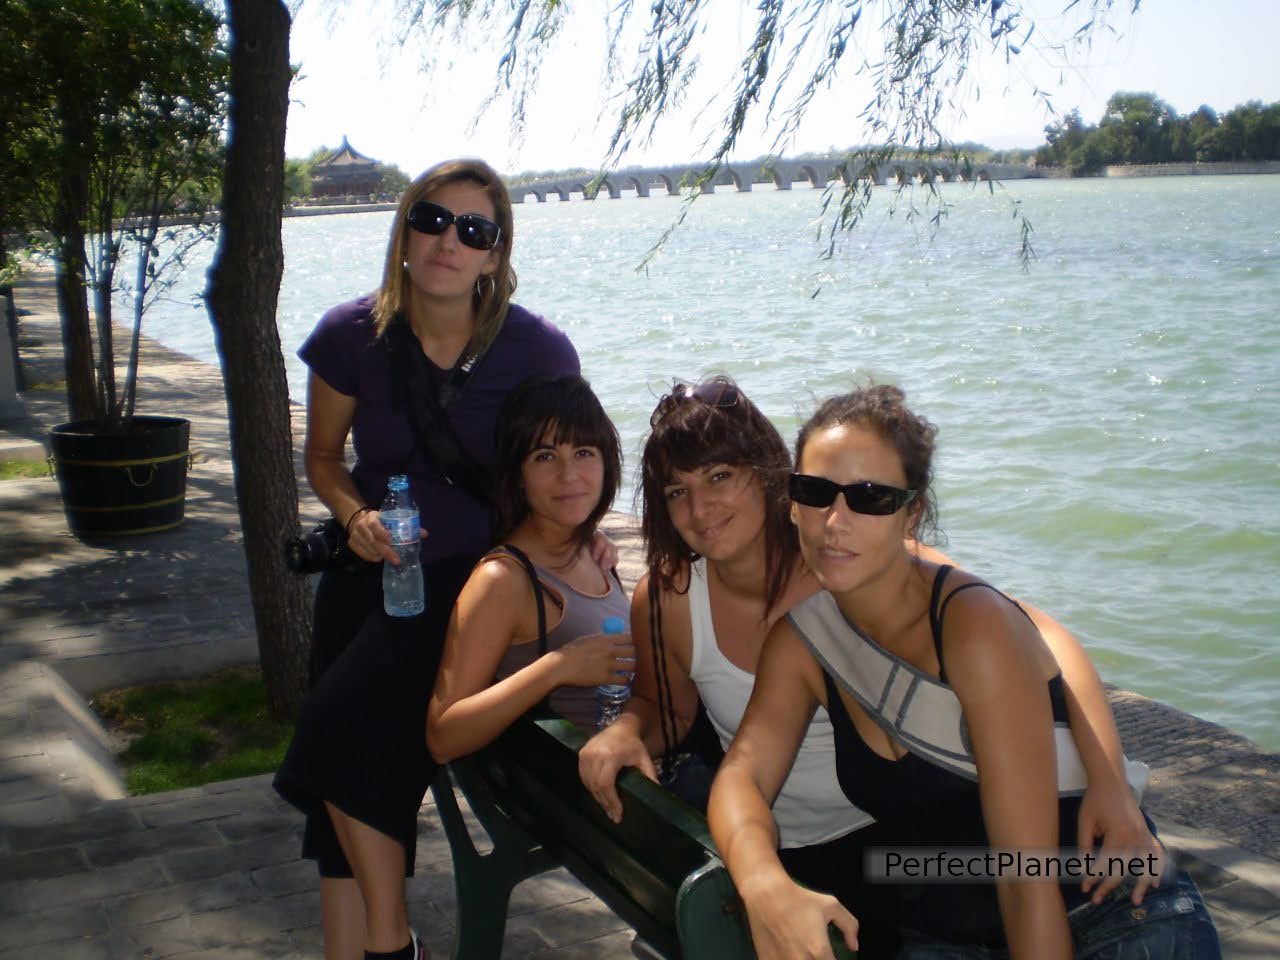 In Beijing Summer Palace